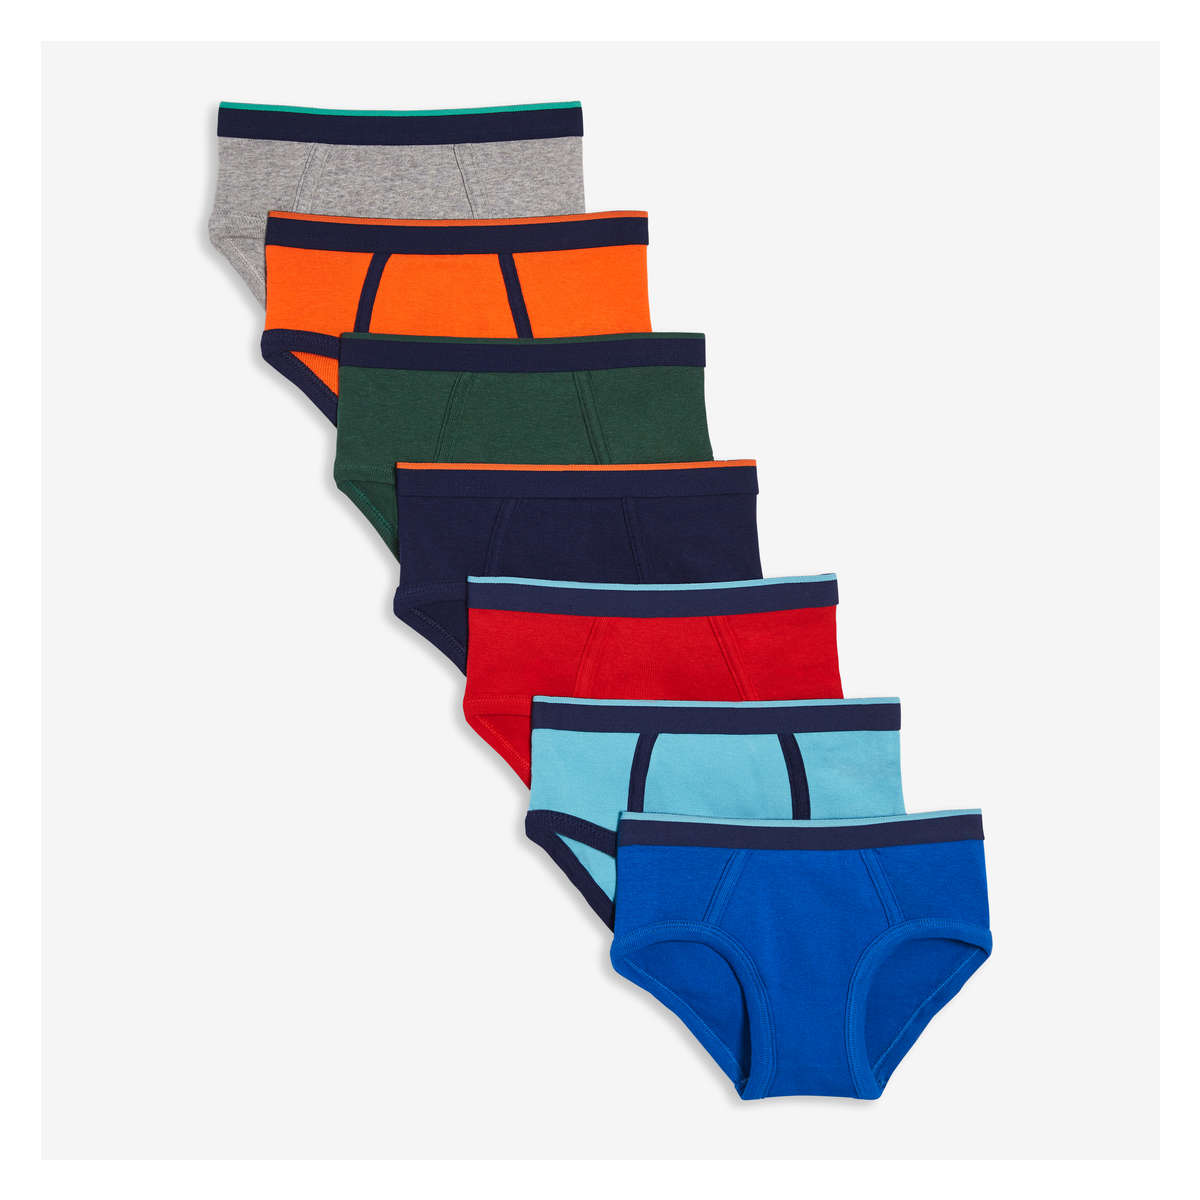 Outlet Shop For Kids - Our latest BONDS men's underwear sale continues.  Lots of new styles now available including these cute new Pride print.  Prices from $7.99, save up to 68% off